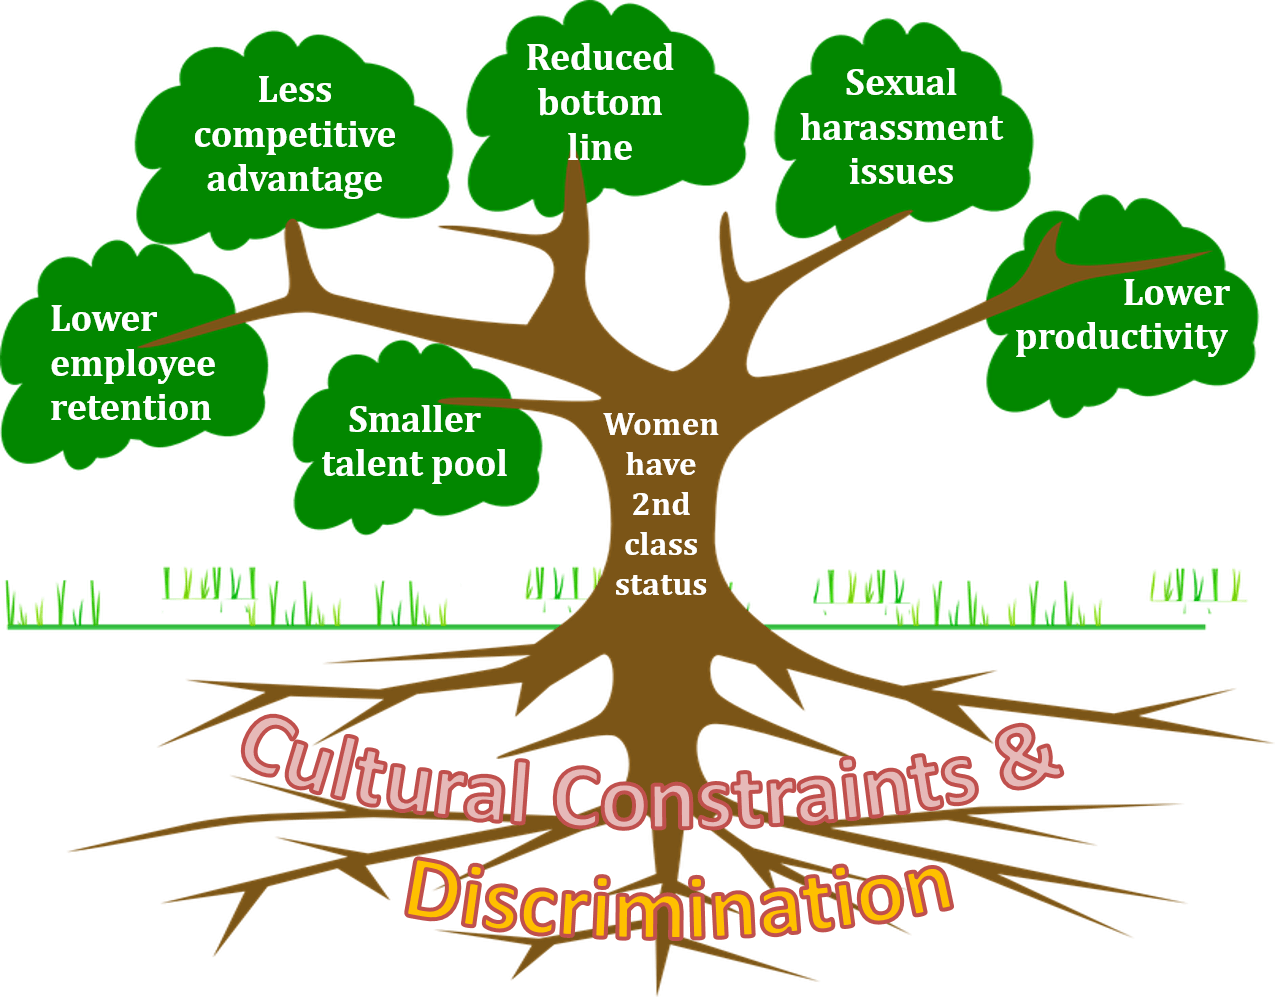 Tree with Cultural Constraints & Discrimination as the Roots, "Women have 2nd Class Status" as the Trunk, and Different Results in the Tree Leaves